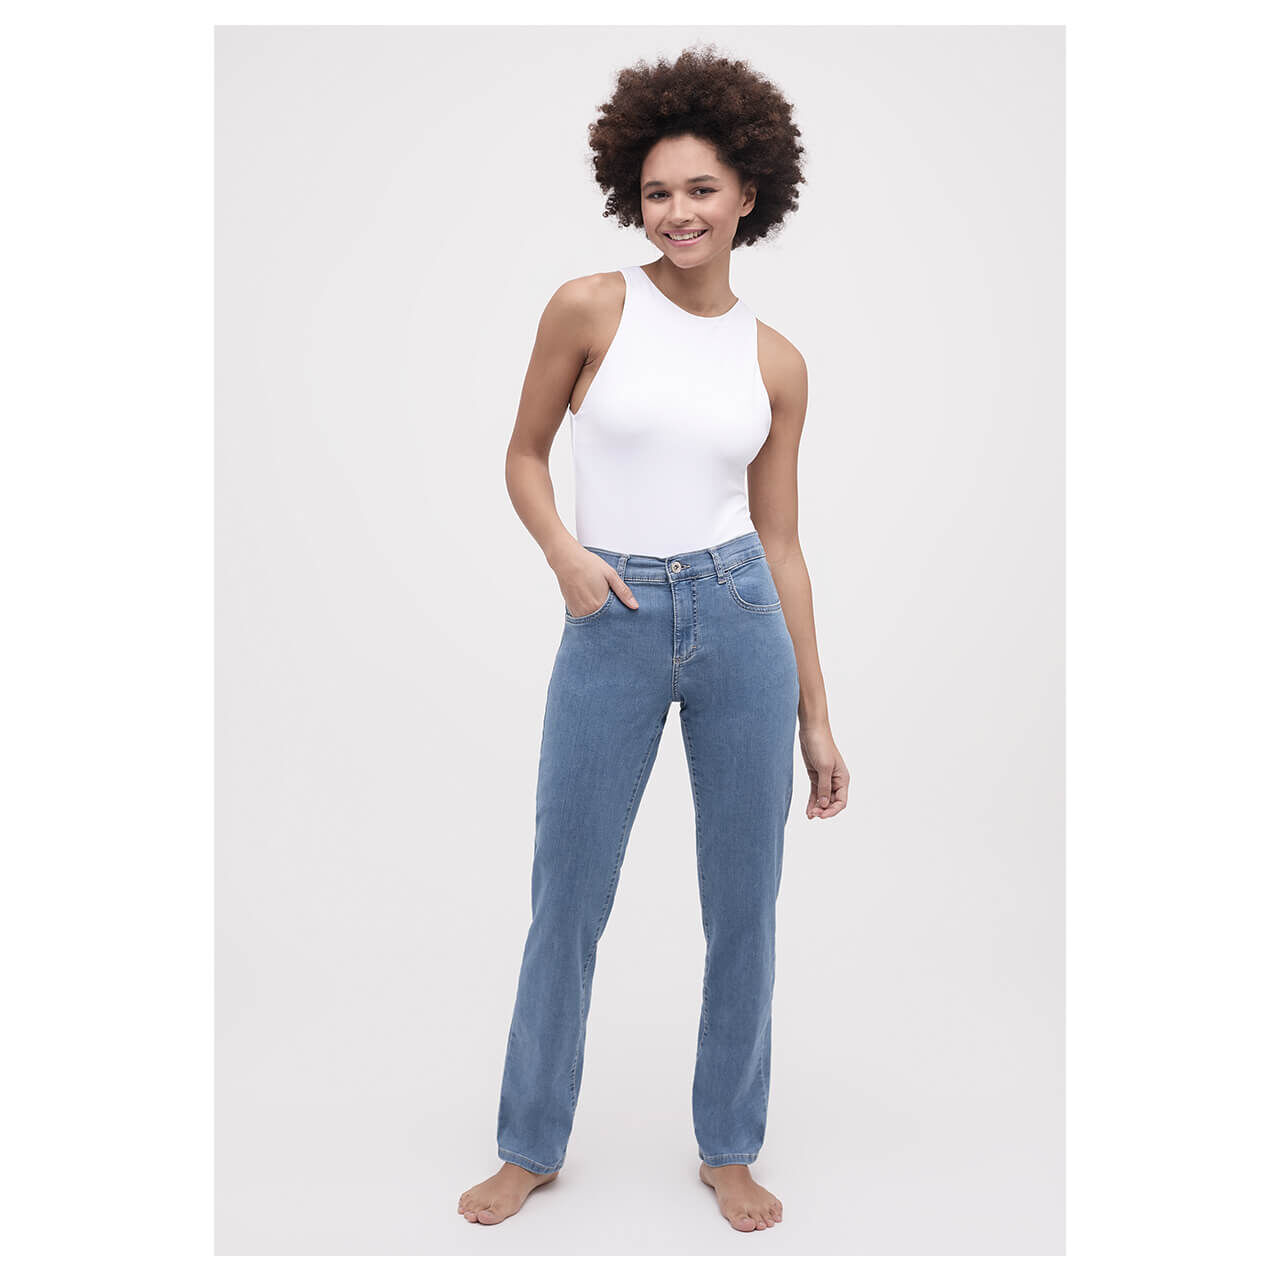 Angels Dolly Jeans light blue